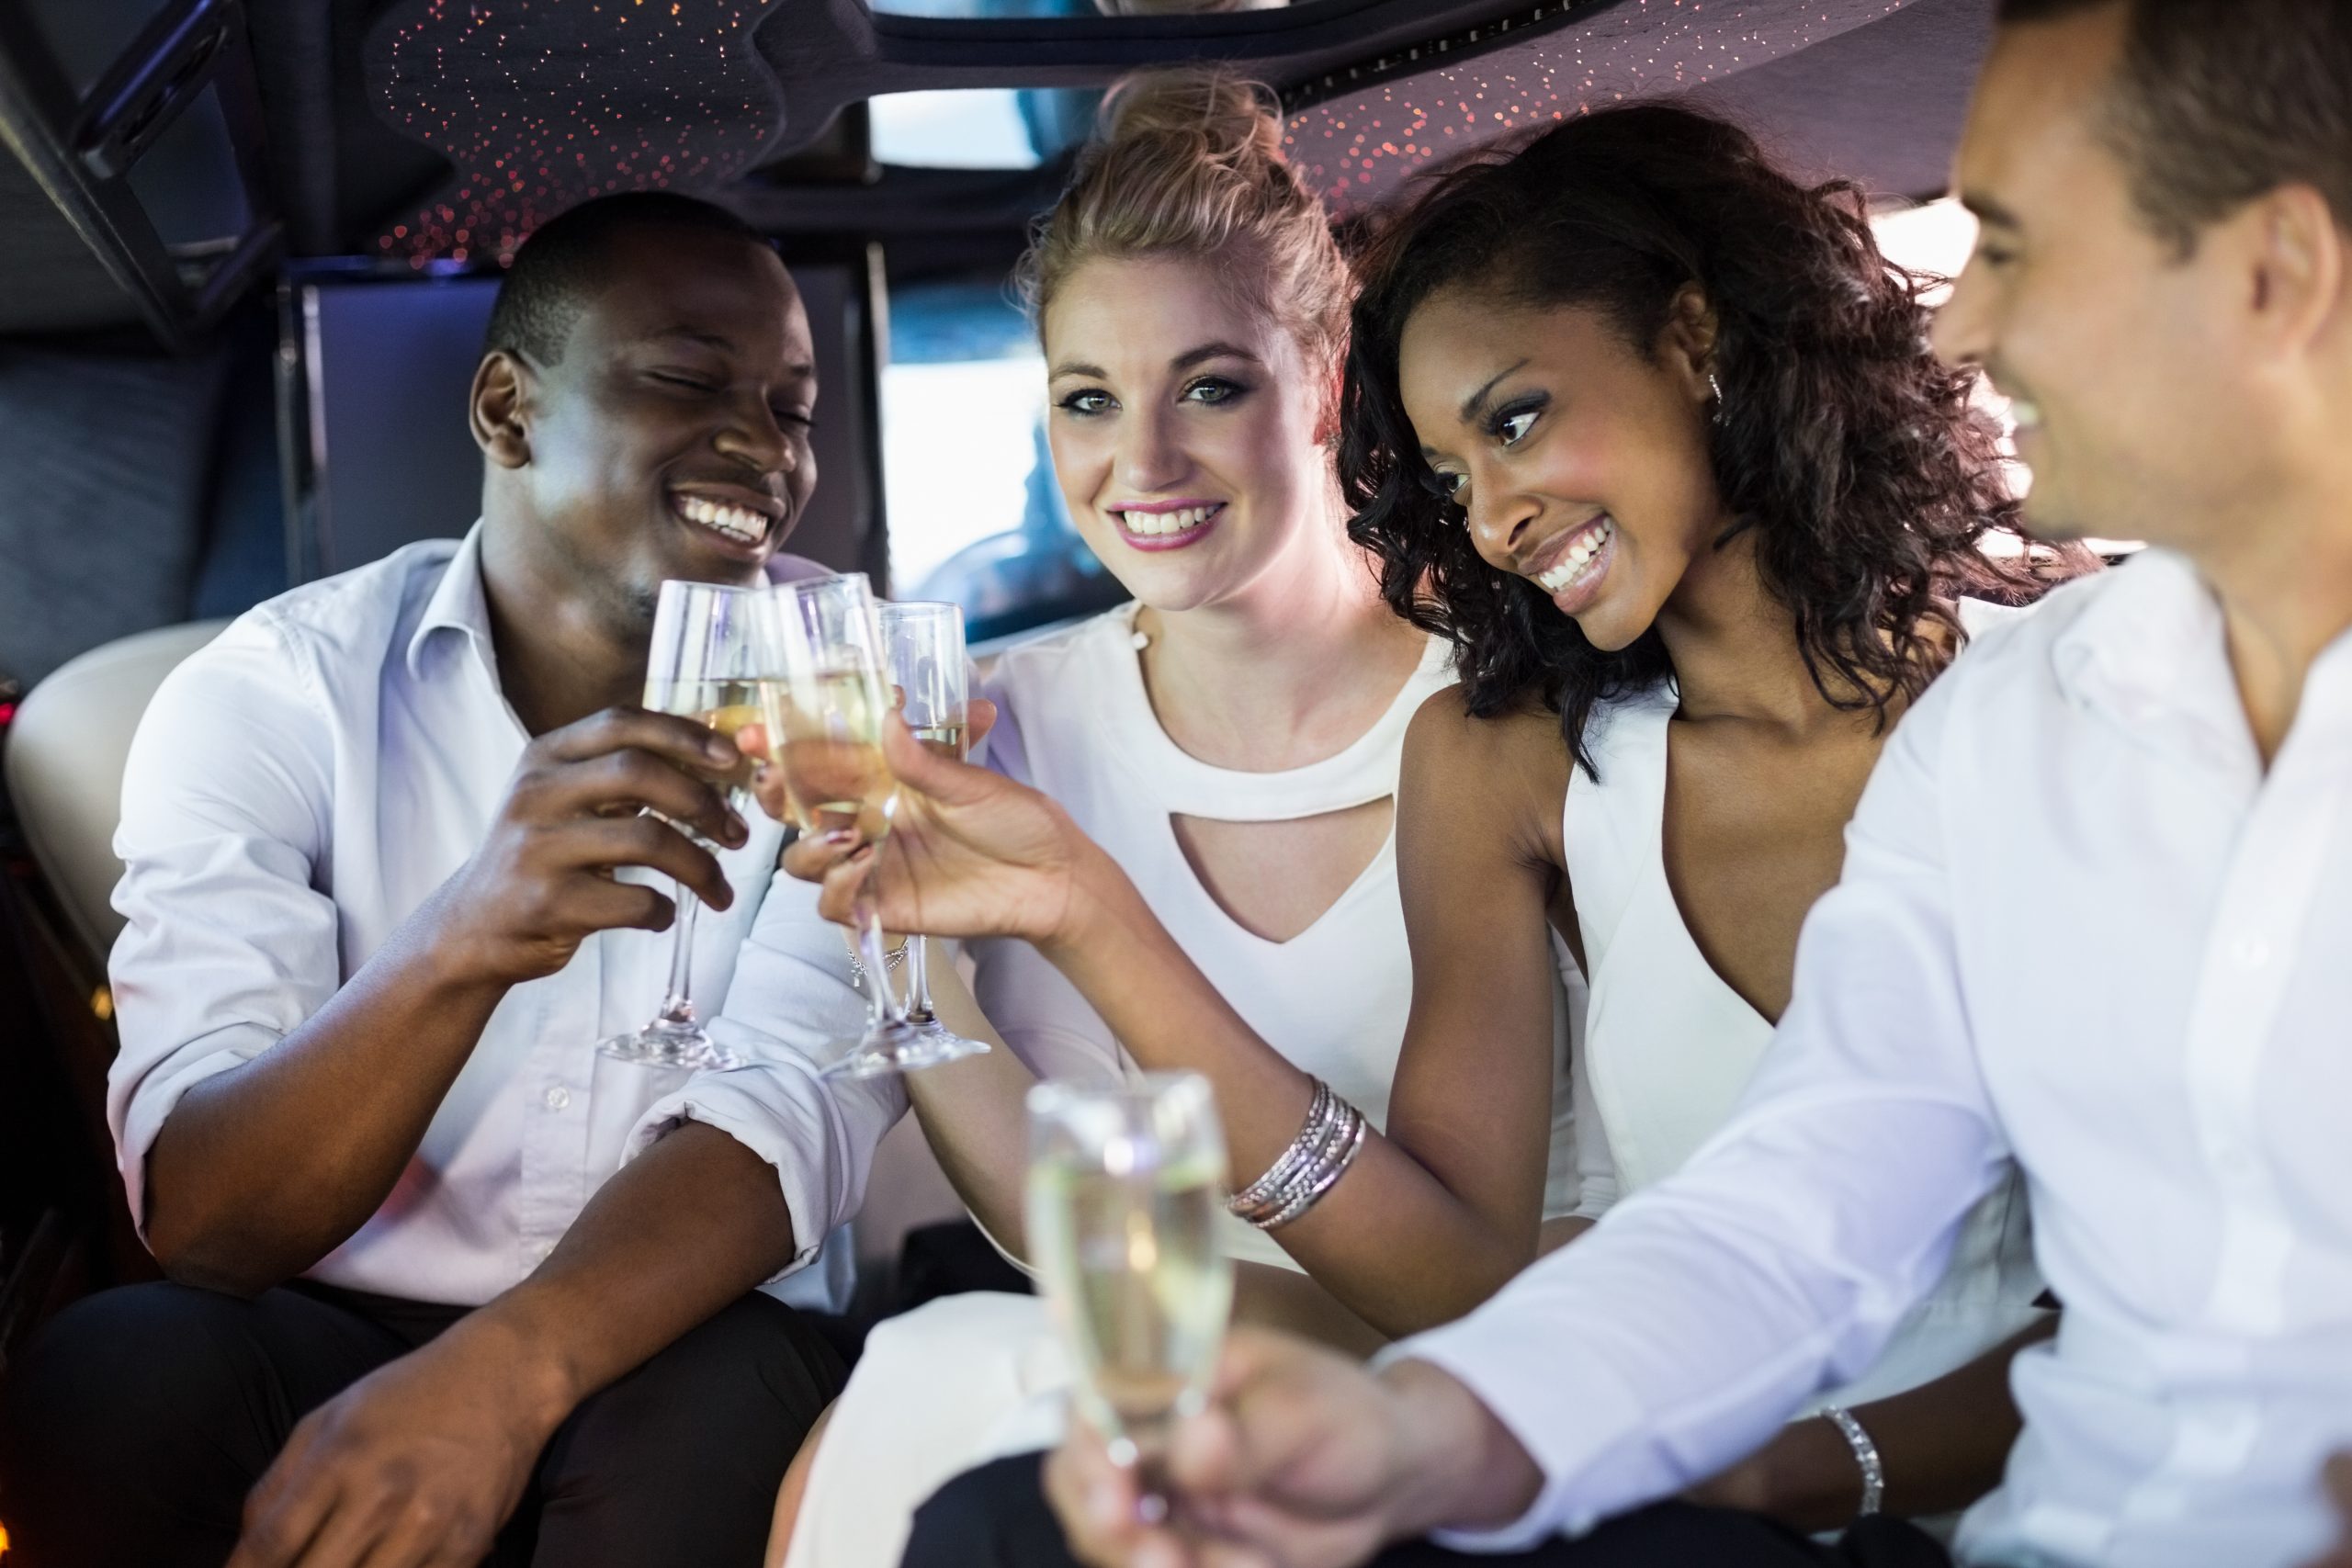 People drink wine in limo